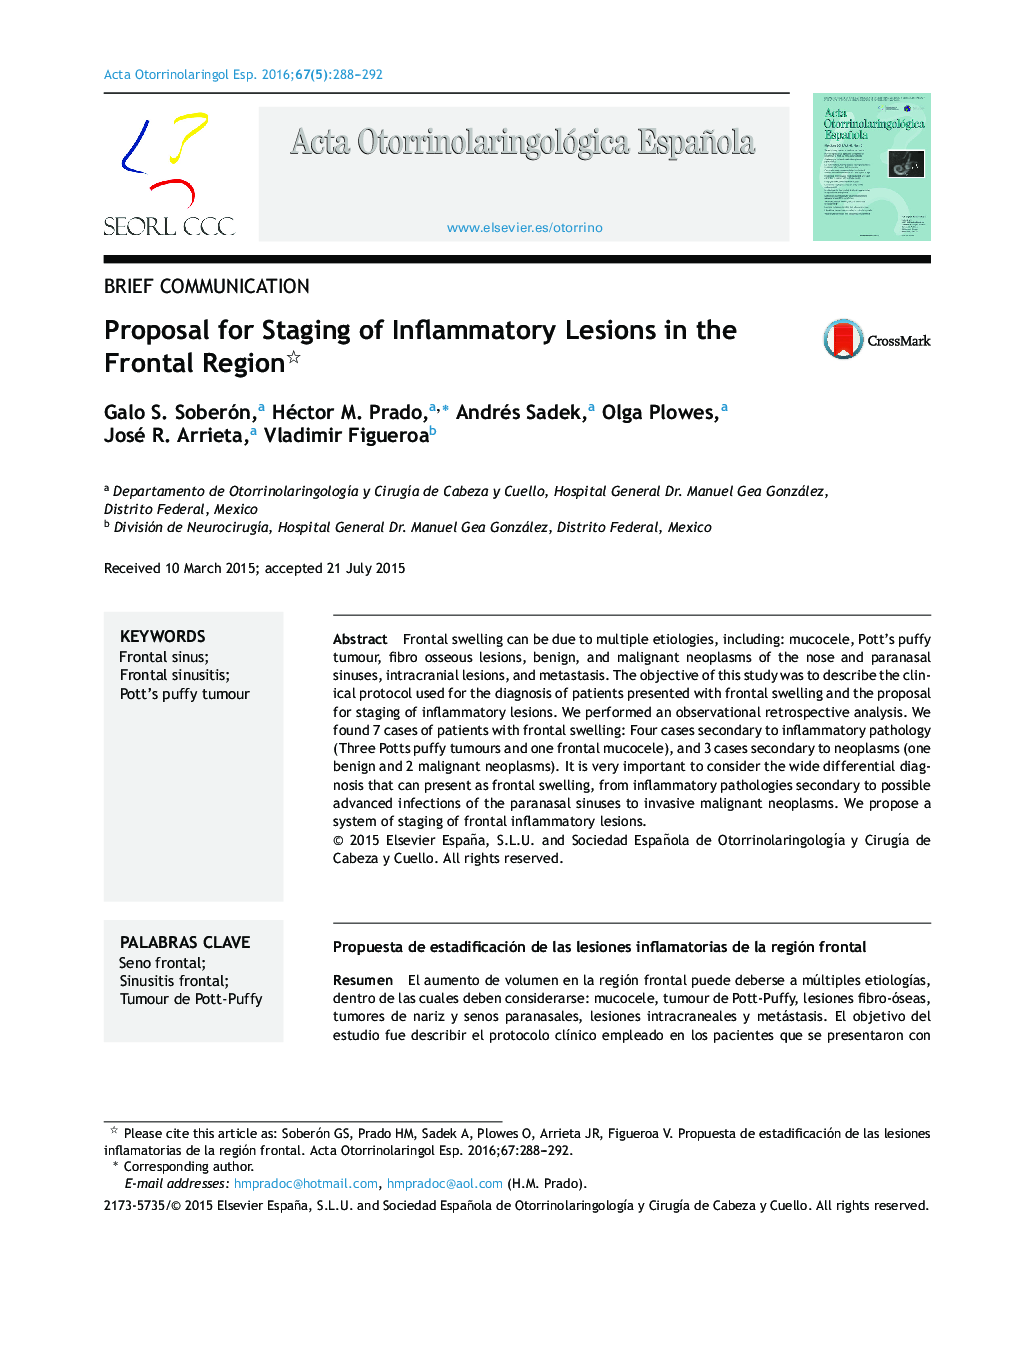 Proposal for Staging of Inflammatory Lesions in the Frontal Region